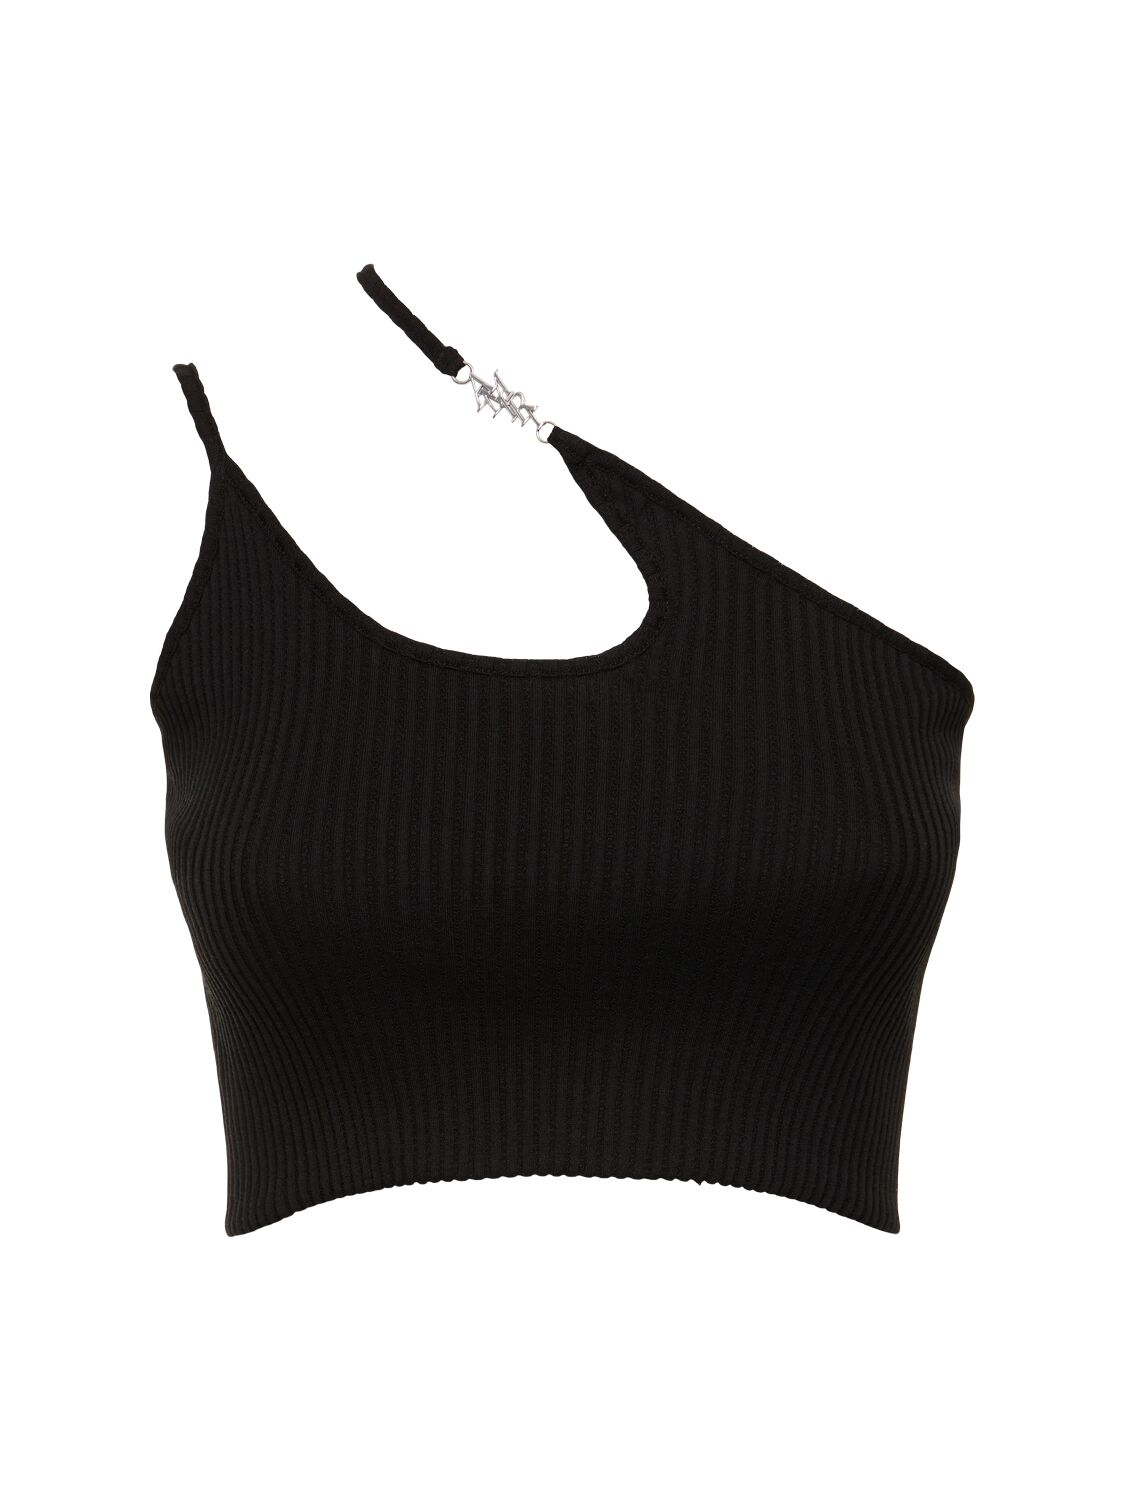 Image of Asymmetric Knit Cropped Top